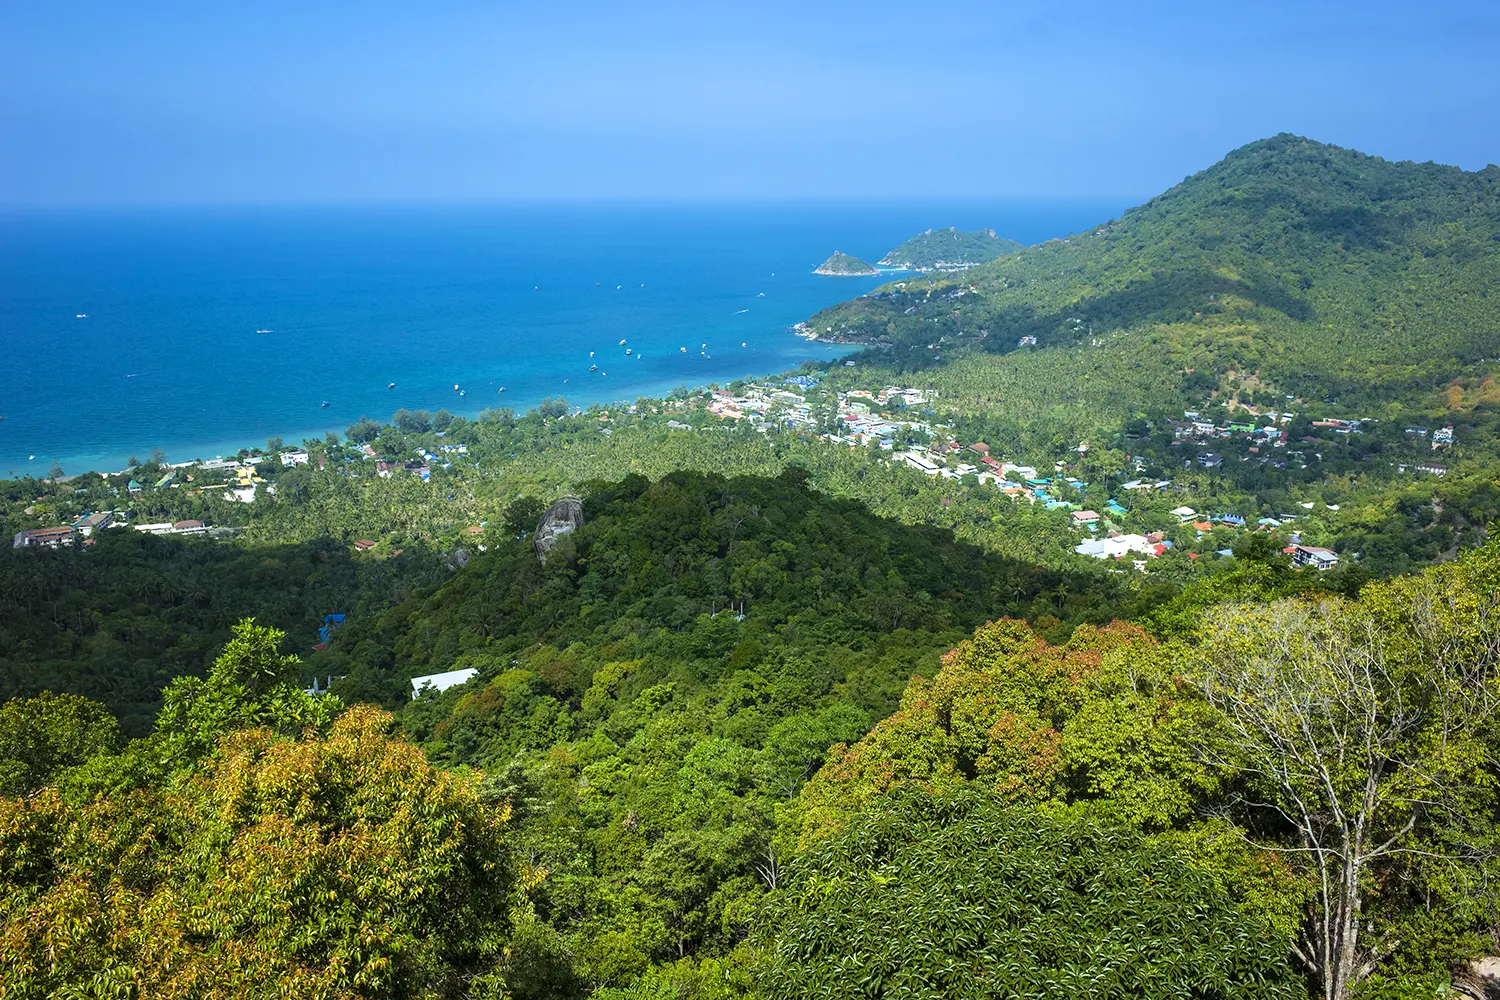 View of Sairee village from West Coast Viewpoint on Koh Tao, Thailand